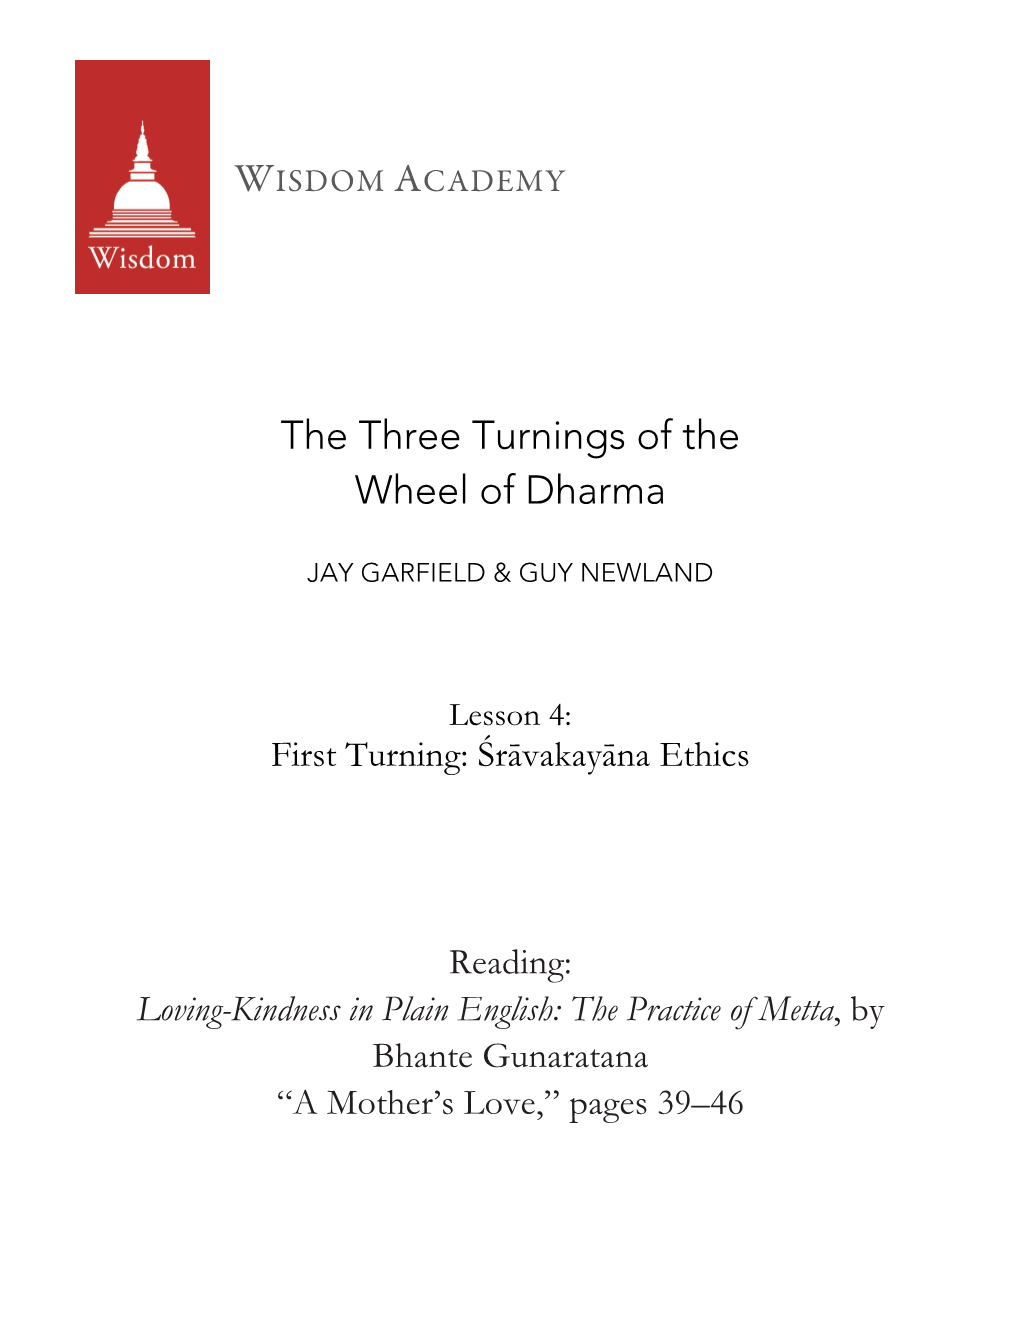 The Three Turnings of the Wheel of Dharma